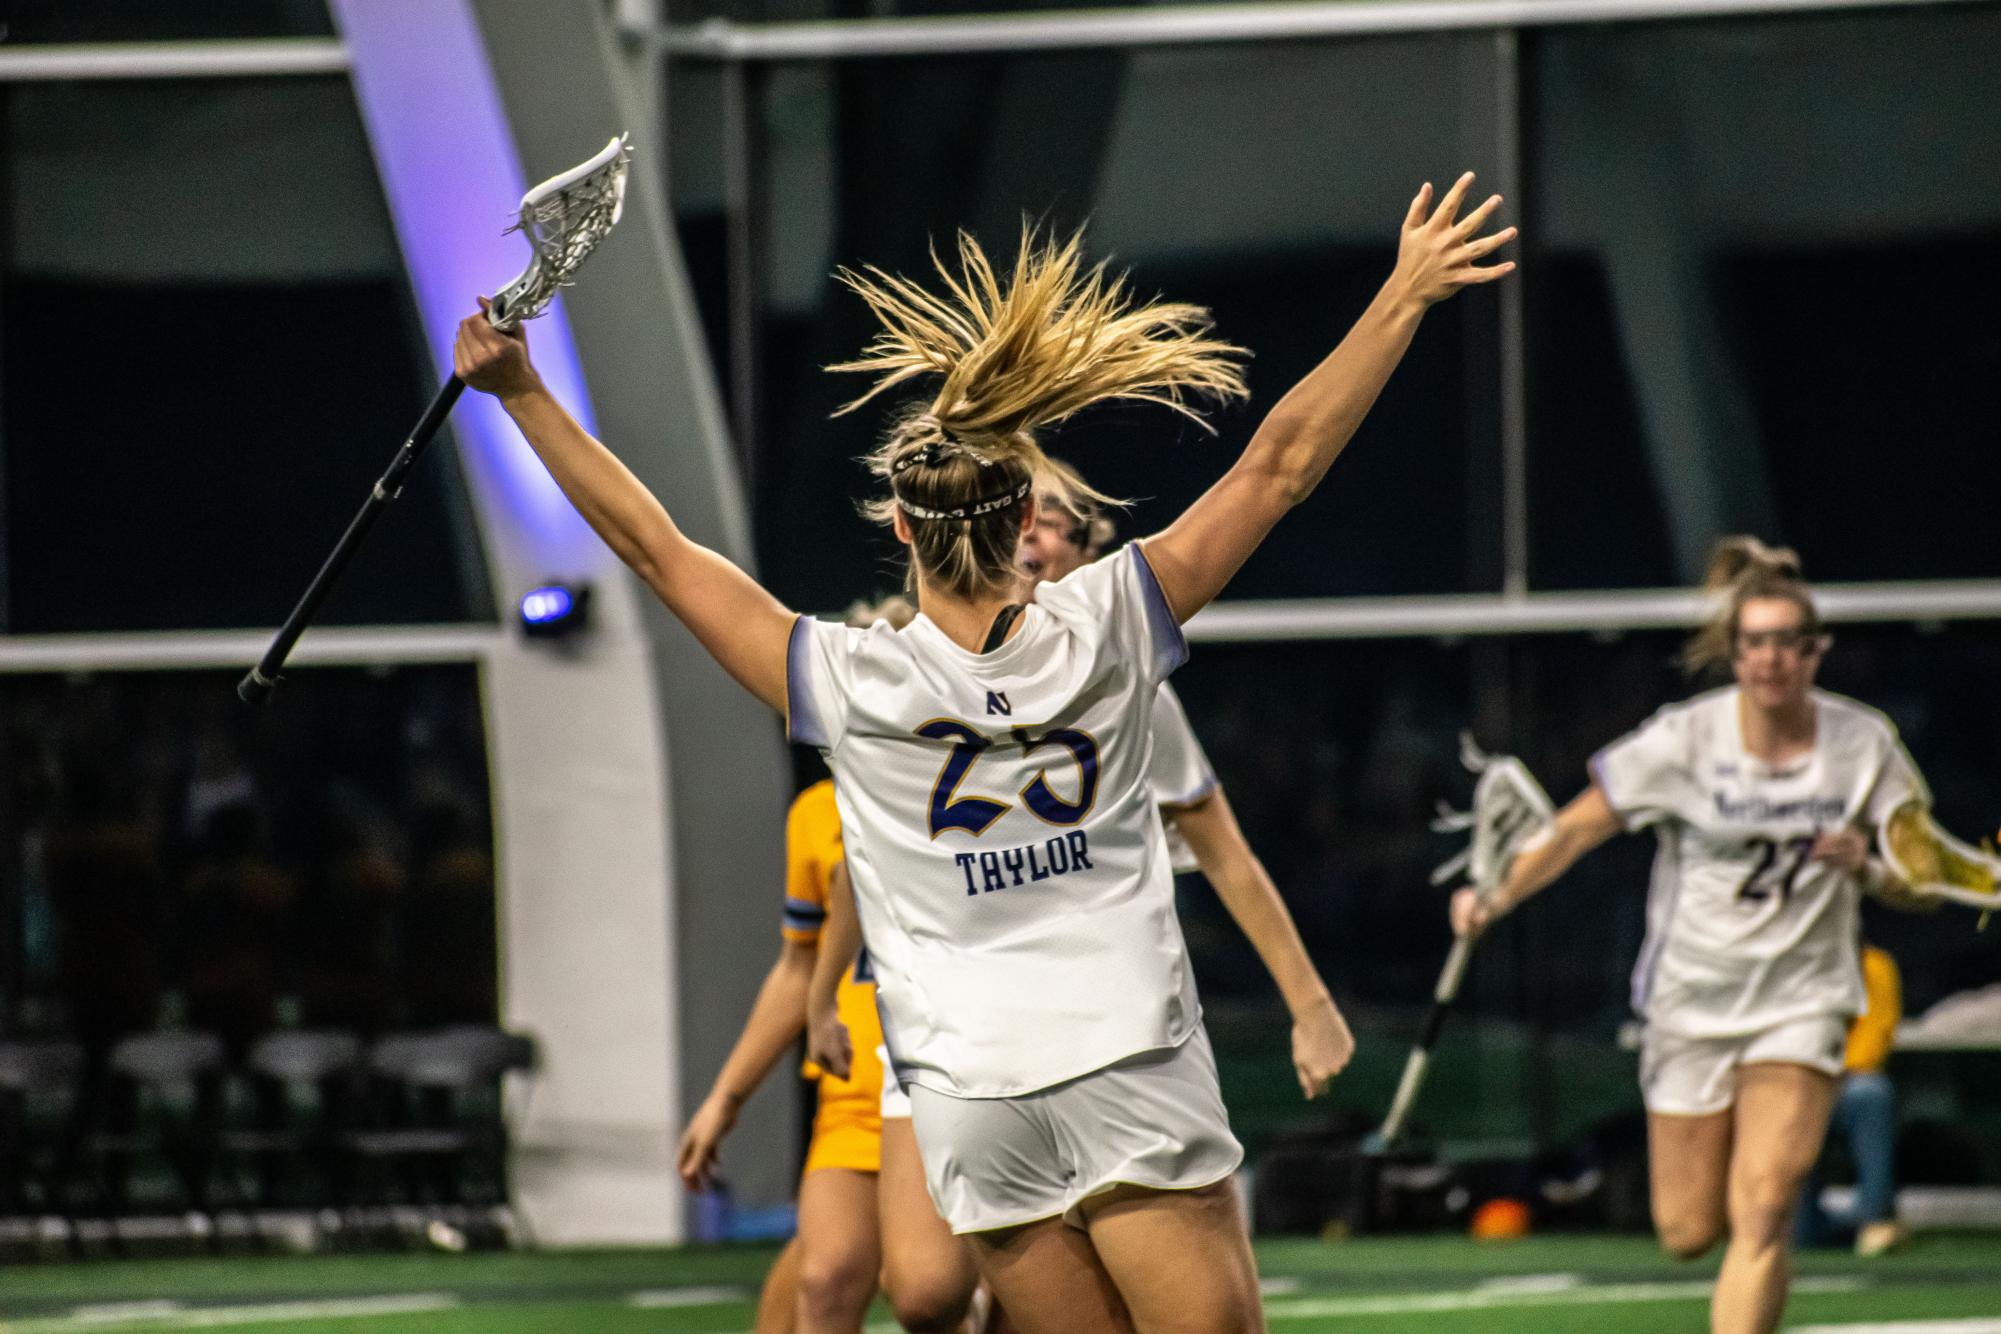 Sophomore attacker Madison Taylor celebrates after scoring a goal against Marquette on Monday. Taylor scored four goals in Northwestern’s 21-3 win over the Golden Eagles.
